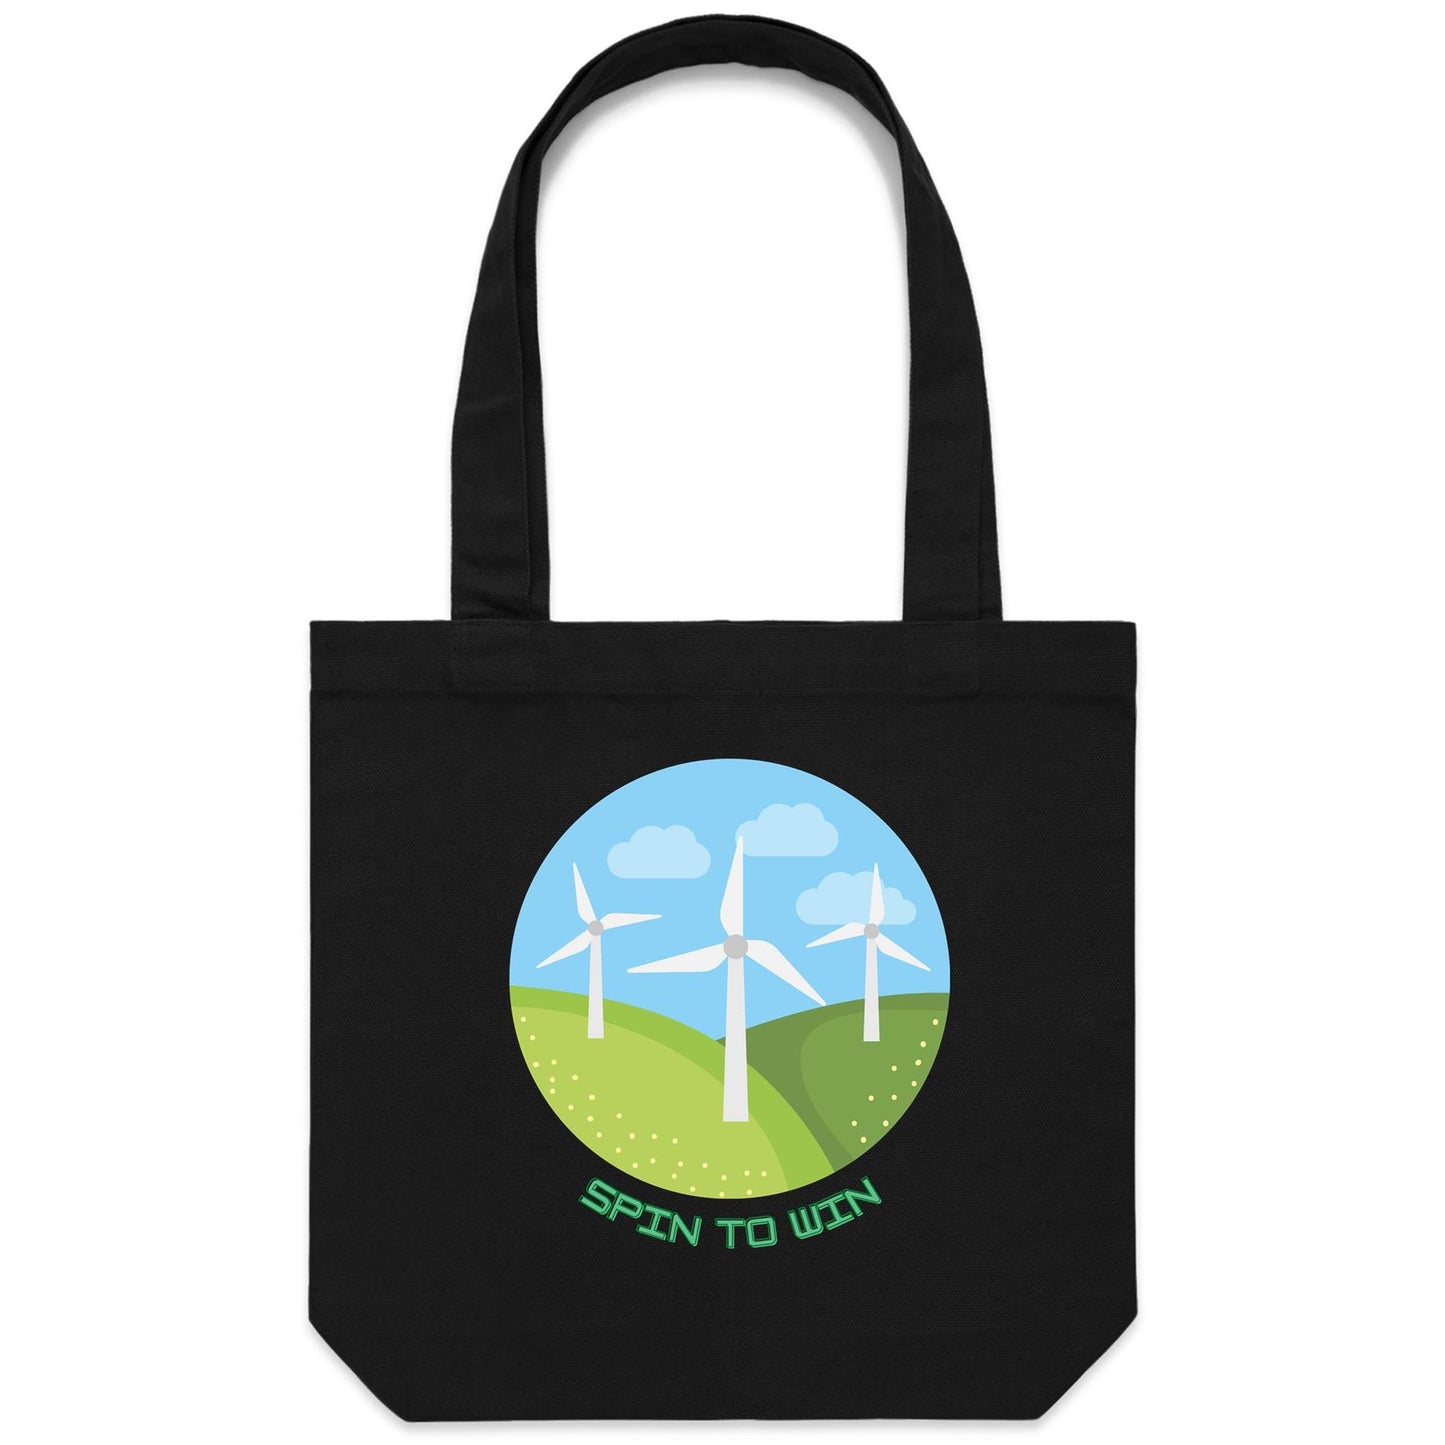 Spin To Win - Canvas Tote Bag Black One-Size Tote Bag Environment